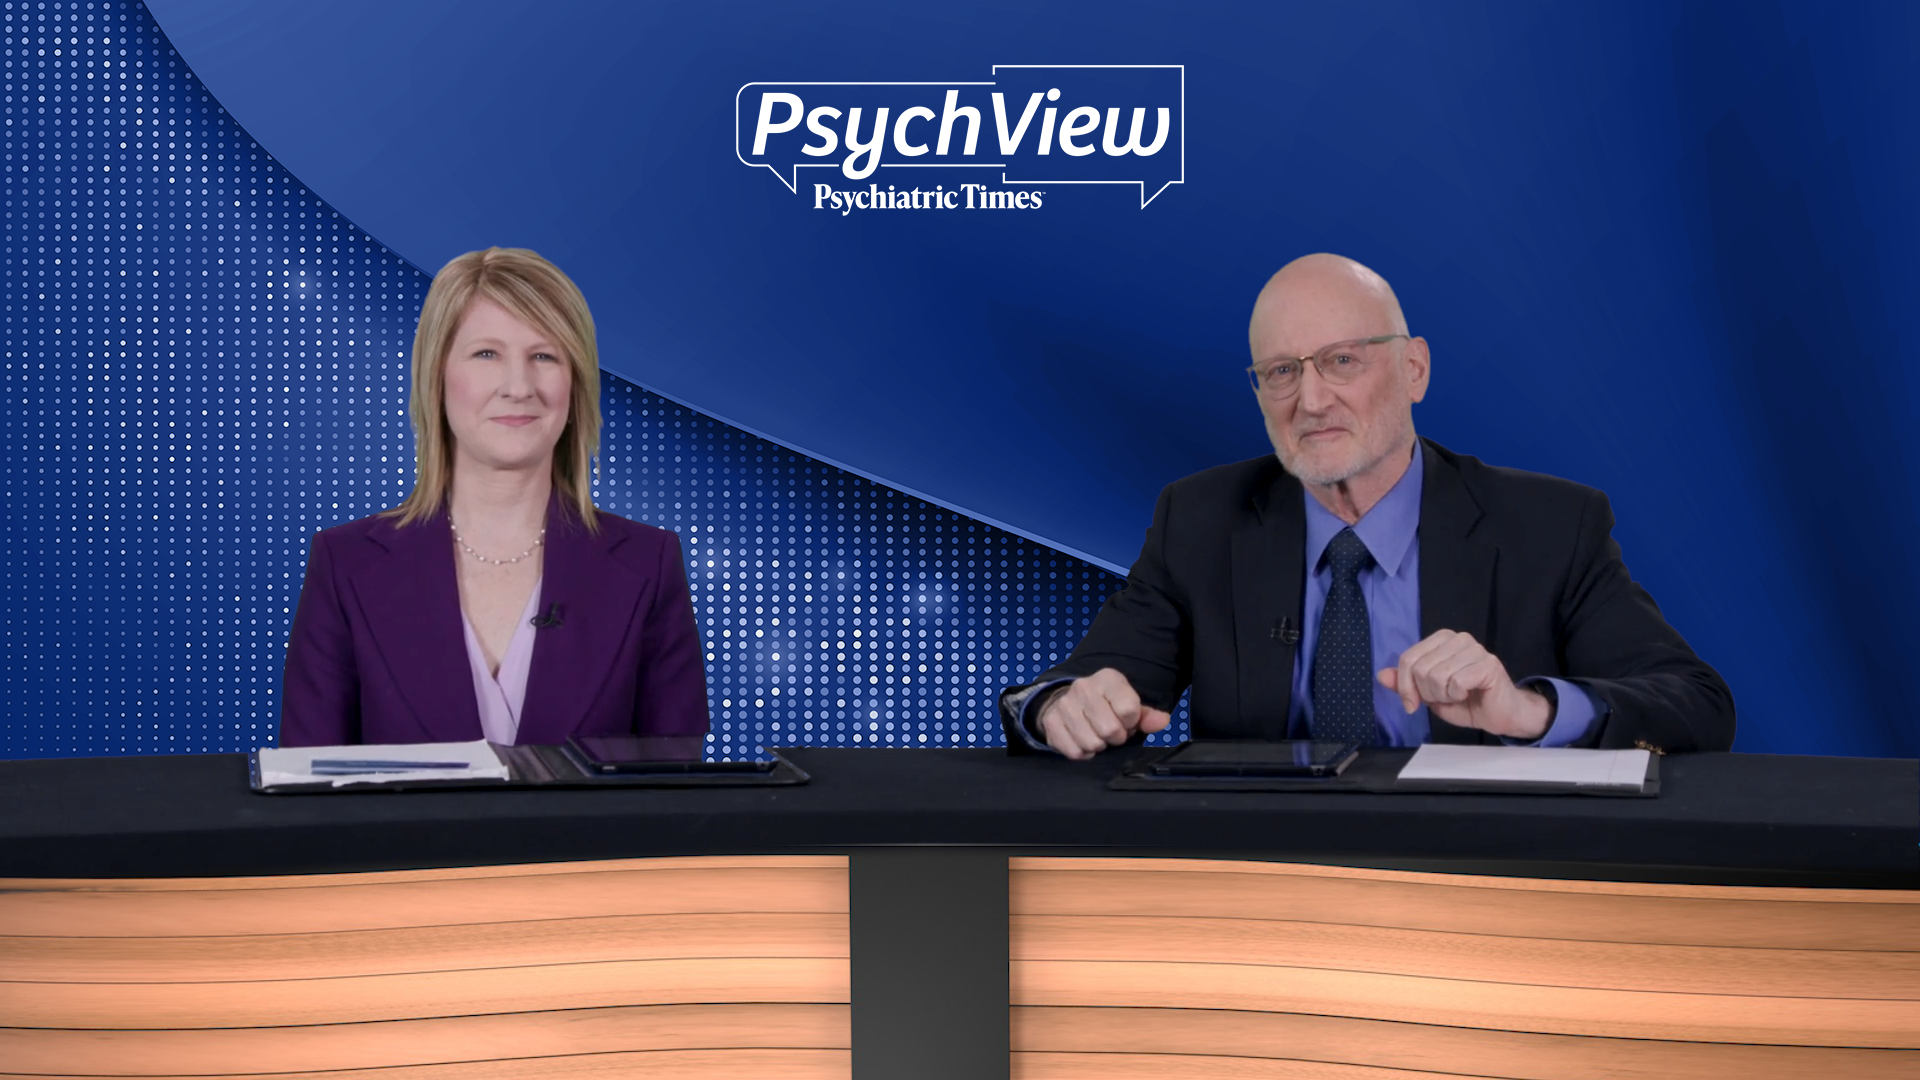 Video 4 - "Physician Awareness of Cognitive Dysfunction in Schizophrenia"